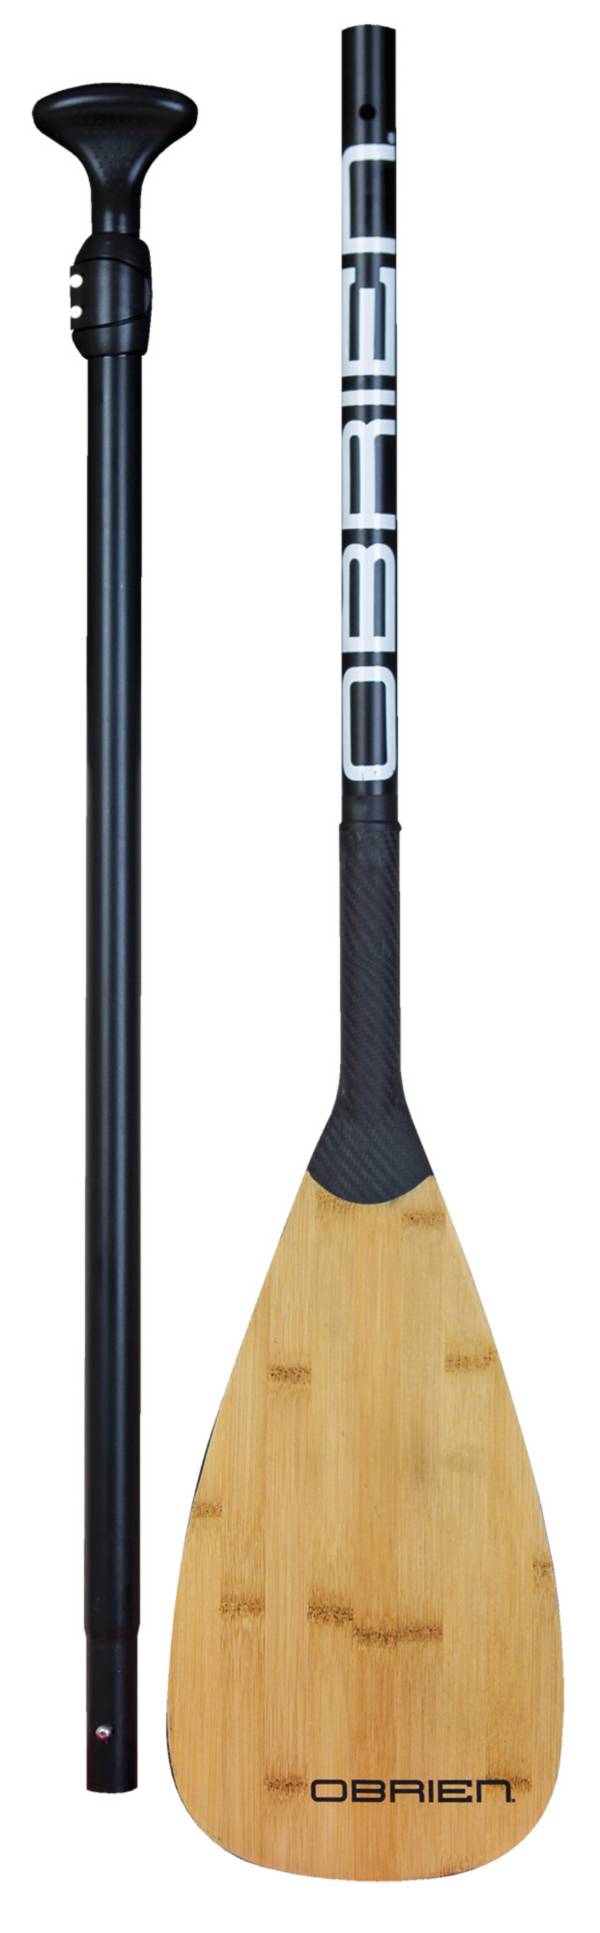 O'Brien Carbon Bamboo 3-Piece Stand-Up Paddle Board Paddle product image